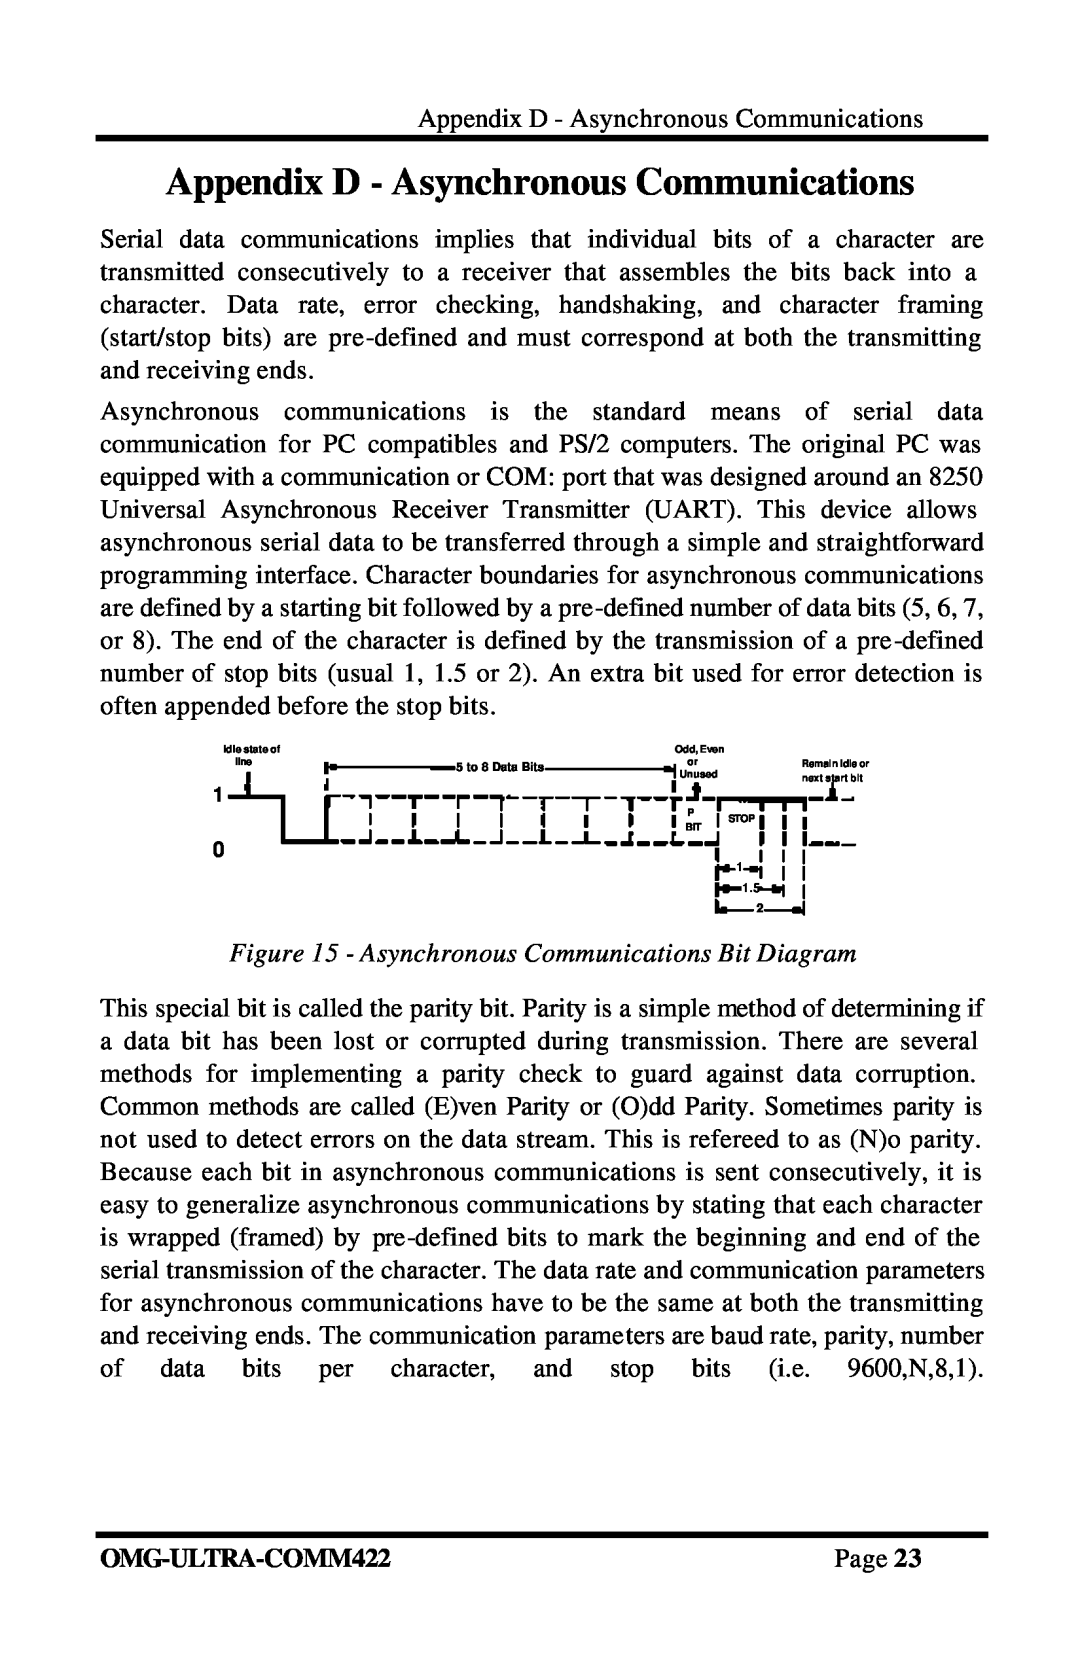 Omega Engineering RS-422/485 manual Appendix D - Asynchronous Communications, Asynchronous Communications Bit Diagram, Page 